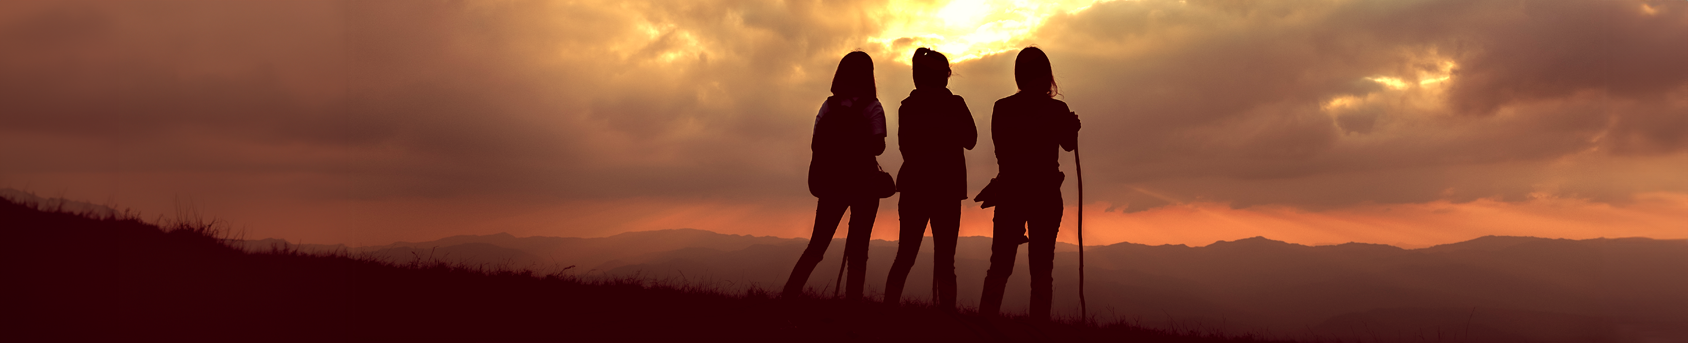 Silhouettes of three women standing on a mountain at sunrise